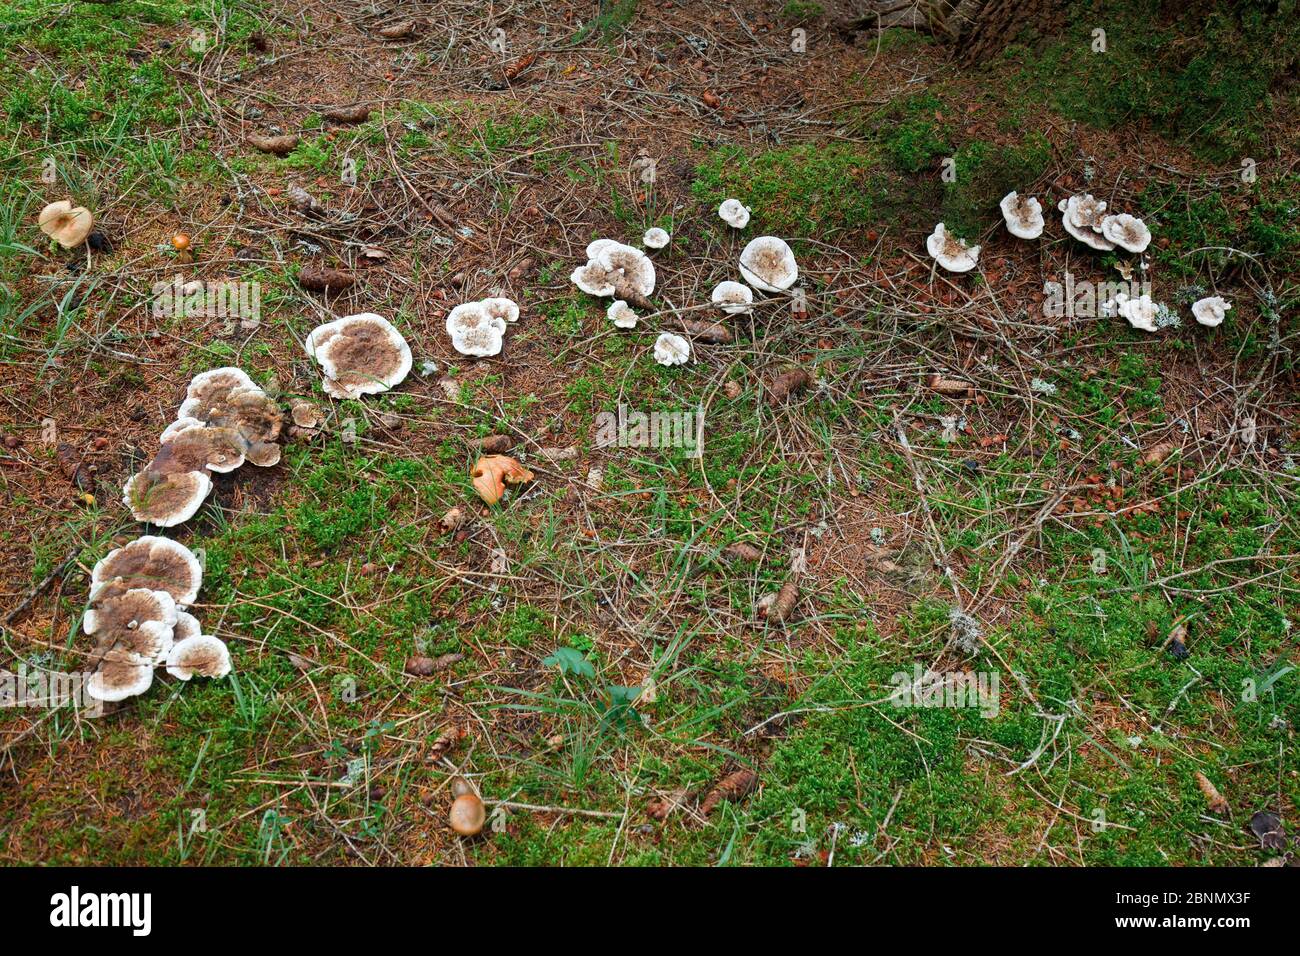 https://c8.alamy.com/comp/2BNMX3F/group-of-old-unknown-mushrooms-on-coniferous-forest-floor-2BNMX3F.jpg